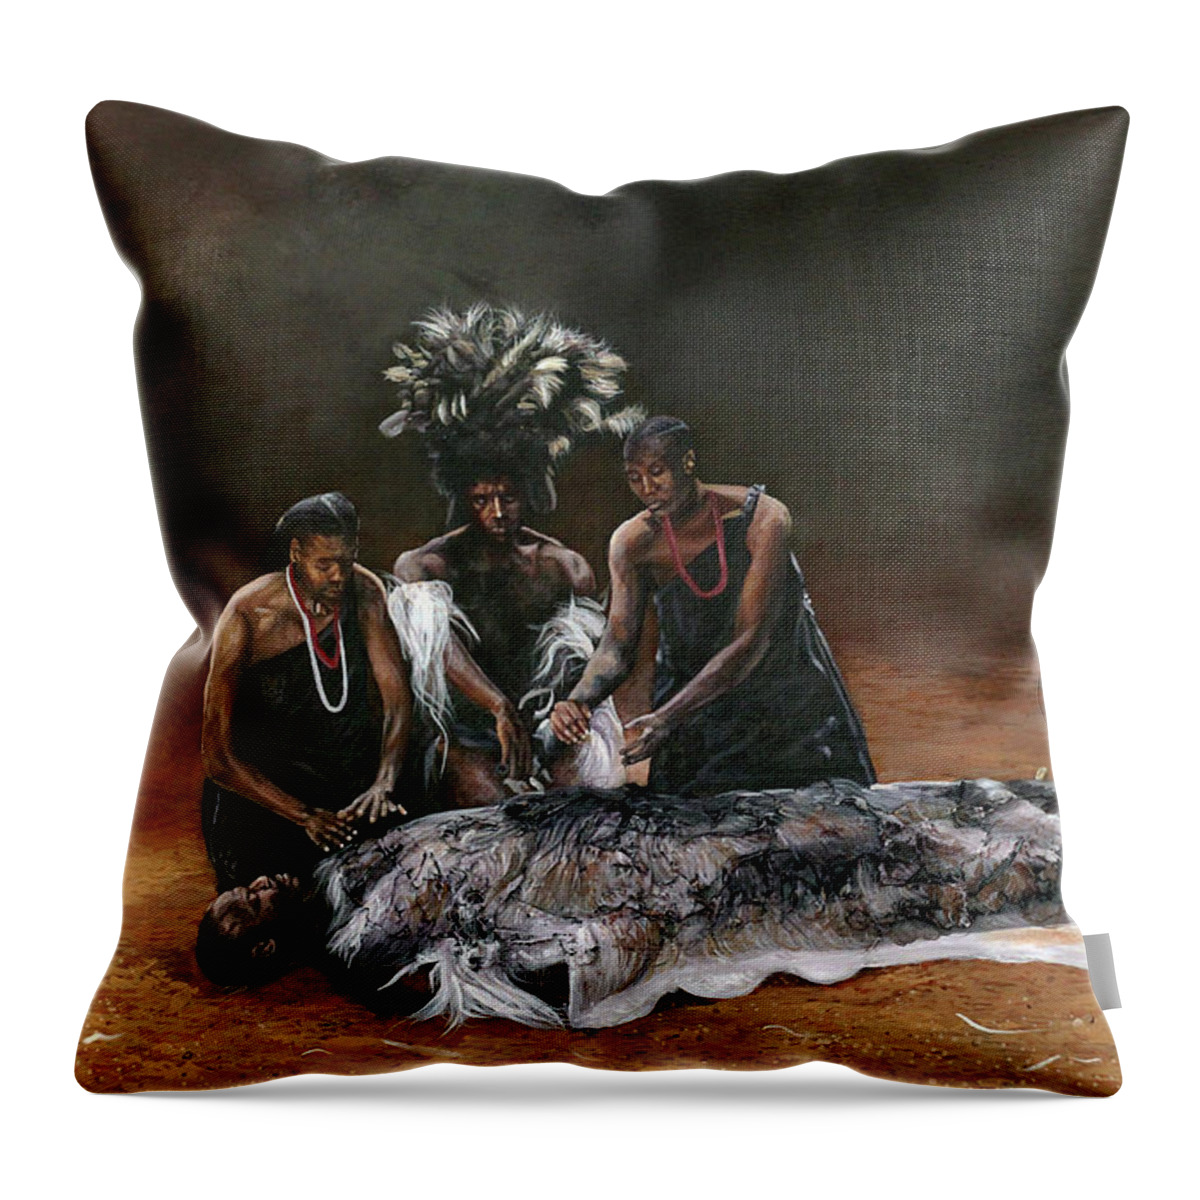 African Art Throw Pillow featuring the painting Death of Nandi by Ronnie Moyo